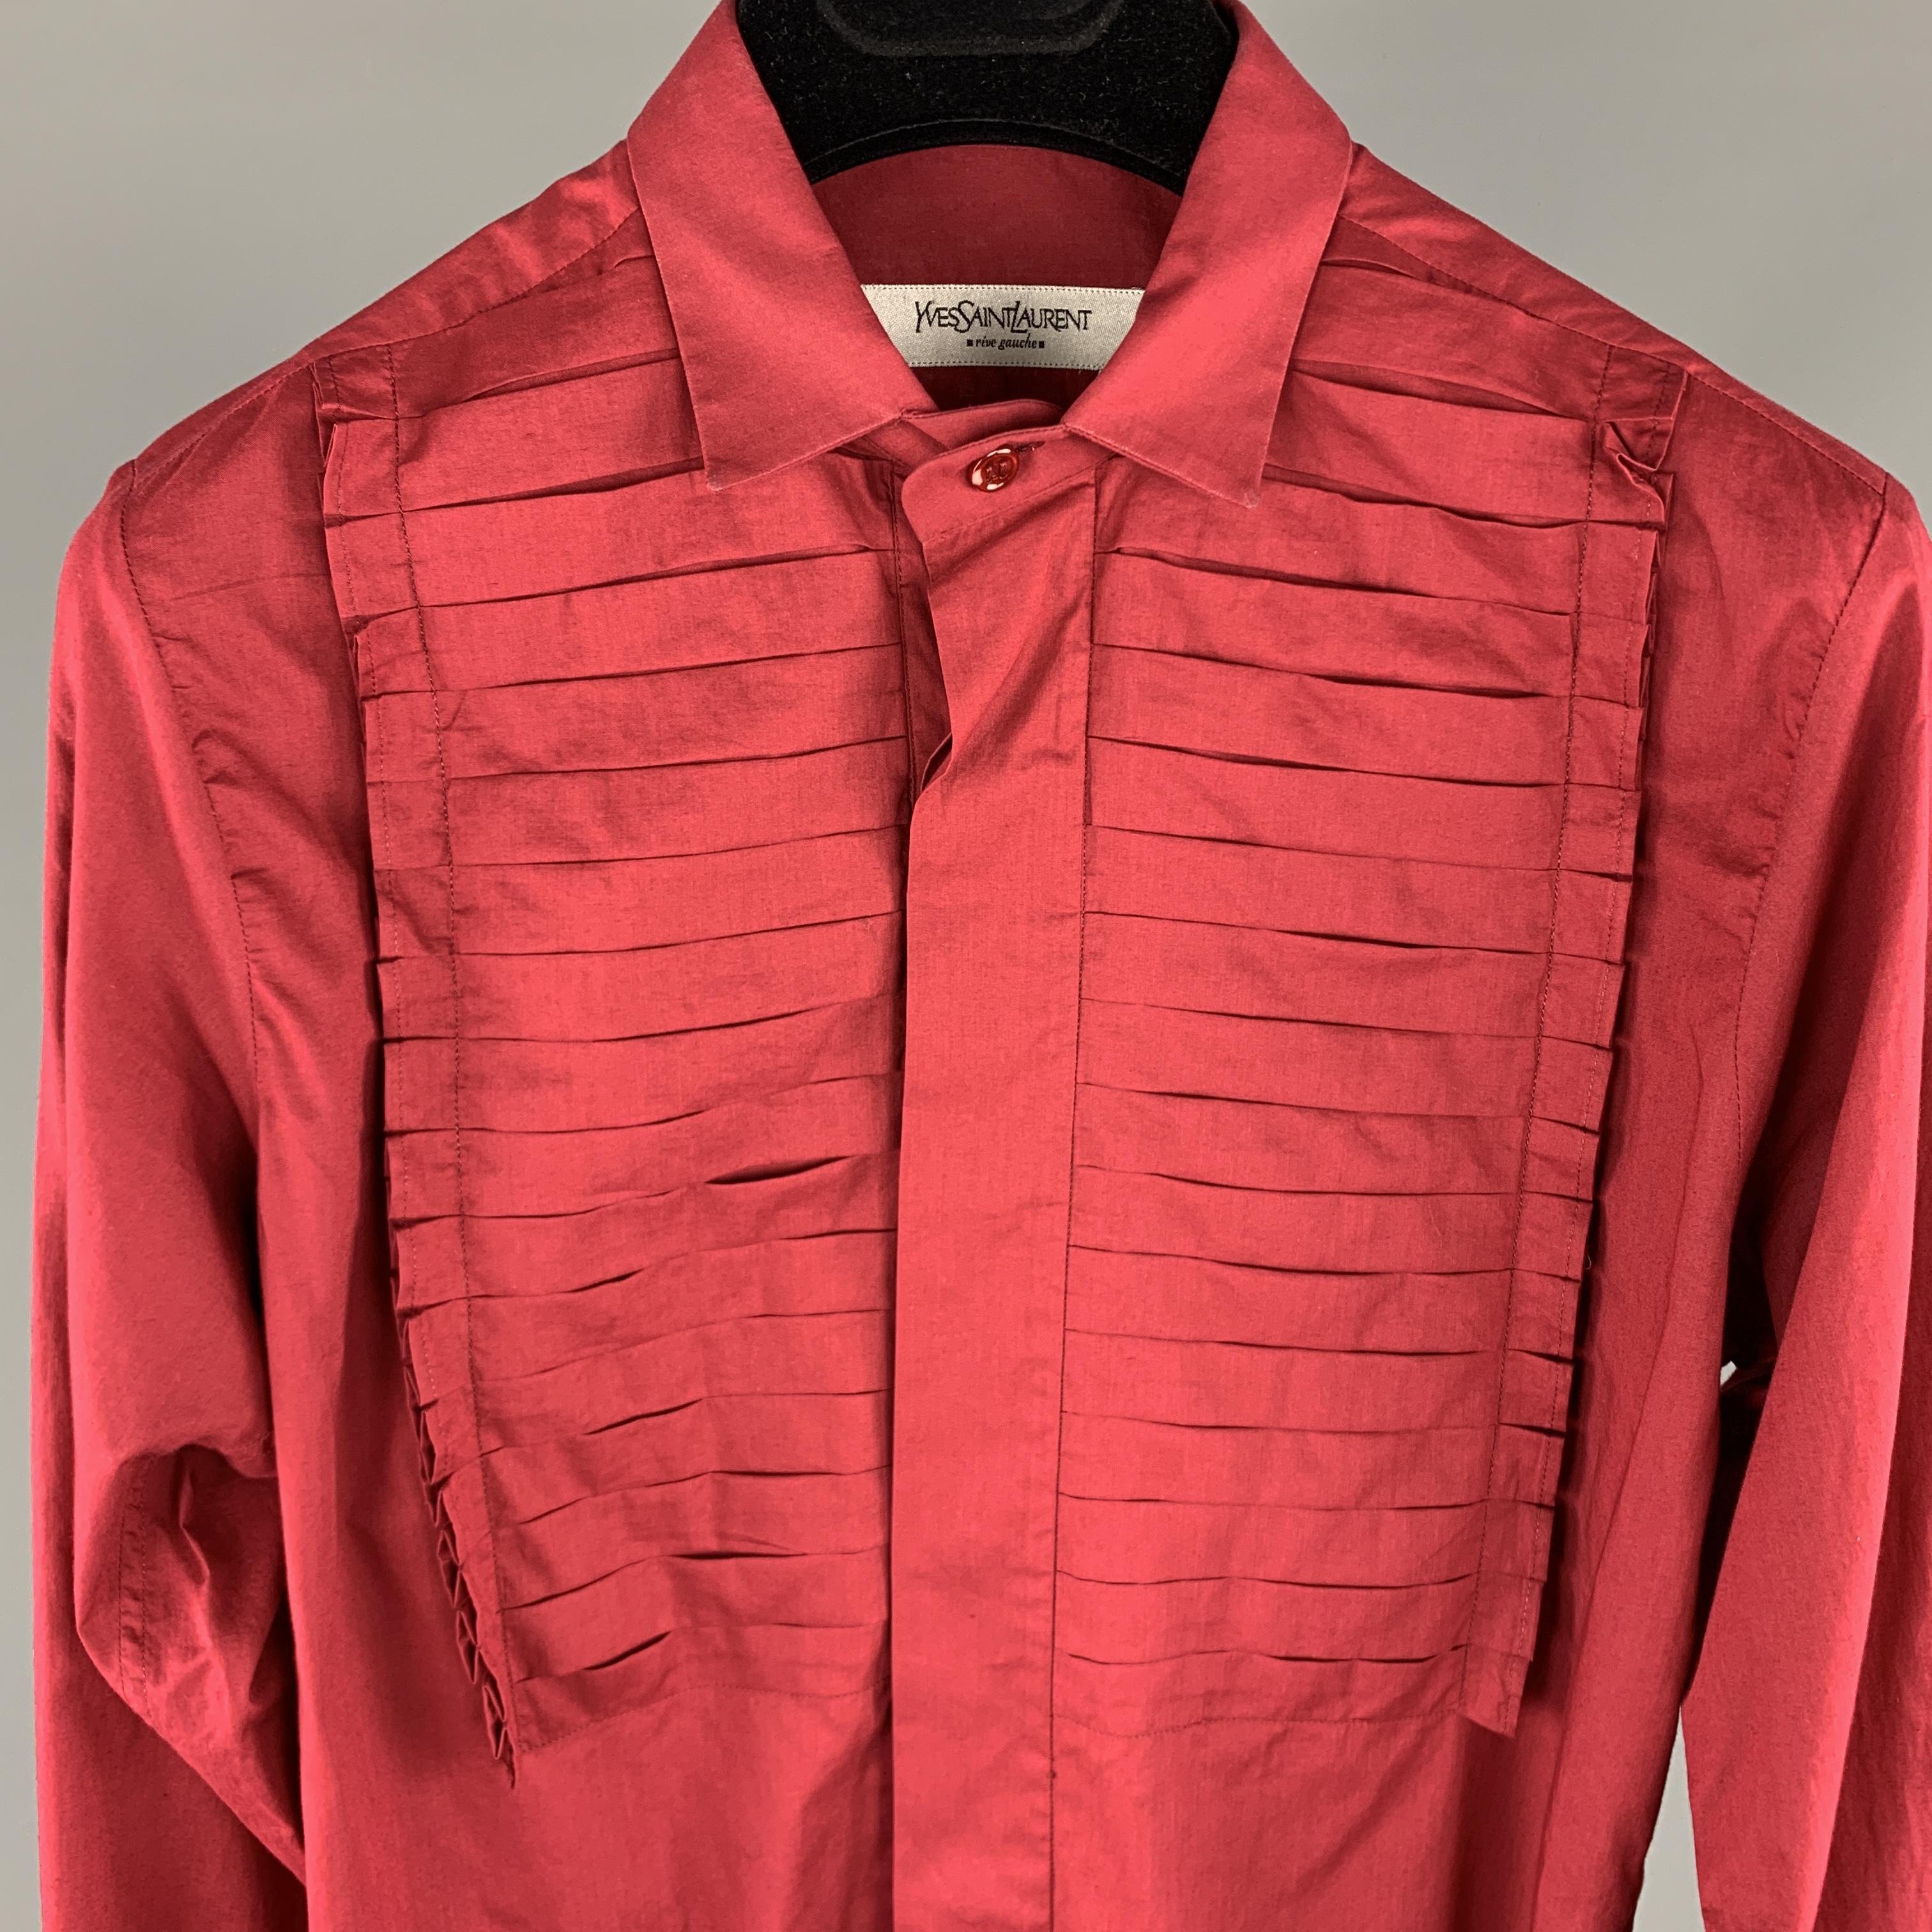 Vintage YVES SAINT LAURENT RIVE GAUCHE Long Sleeve Shirt comes in a burgundy tone in a solid cotton material, with a narrow collar, a pleated panel at front, French cuffs, hidden buttons at closure, button up. Made in Italy.

Very Good Pre-Owned